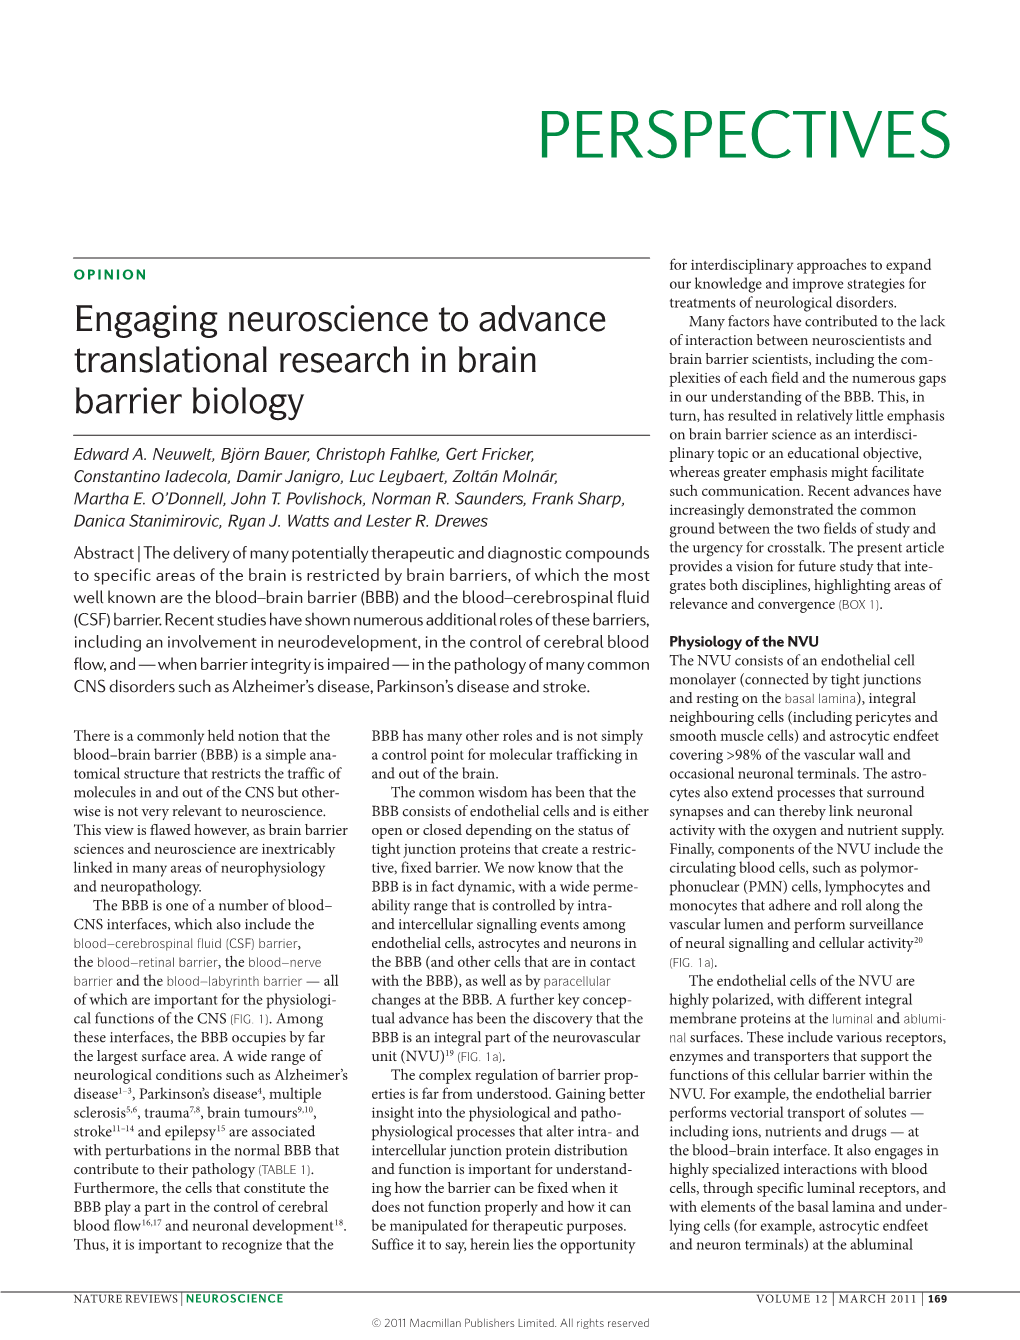 Engaging Neuroscience to Advance Translational Research in Brain Barrier Biology